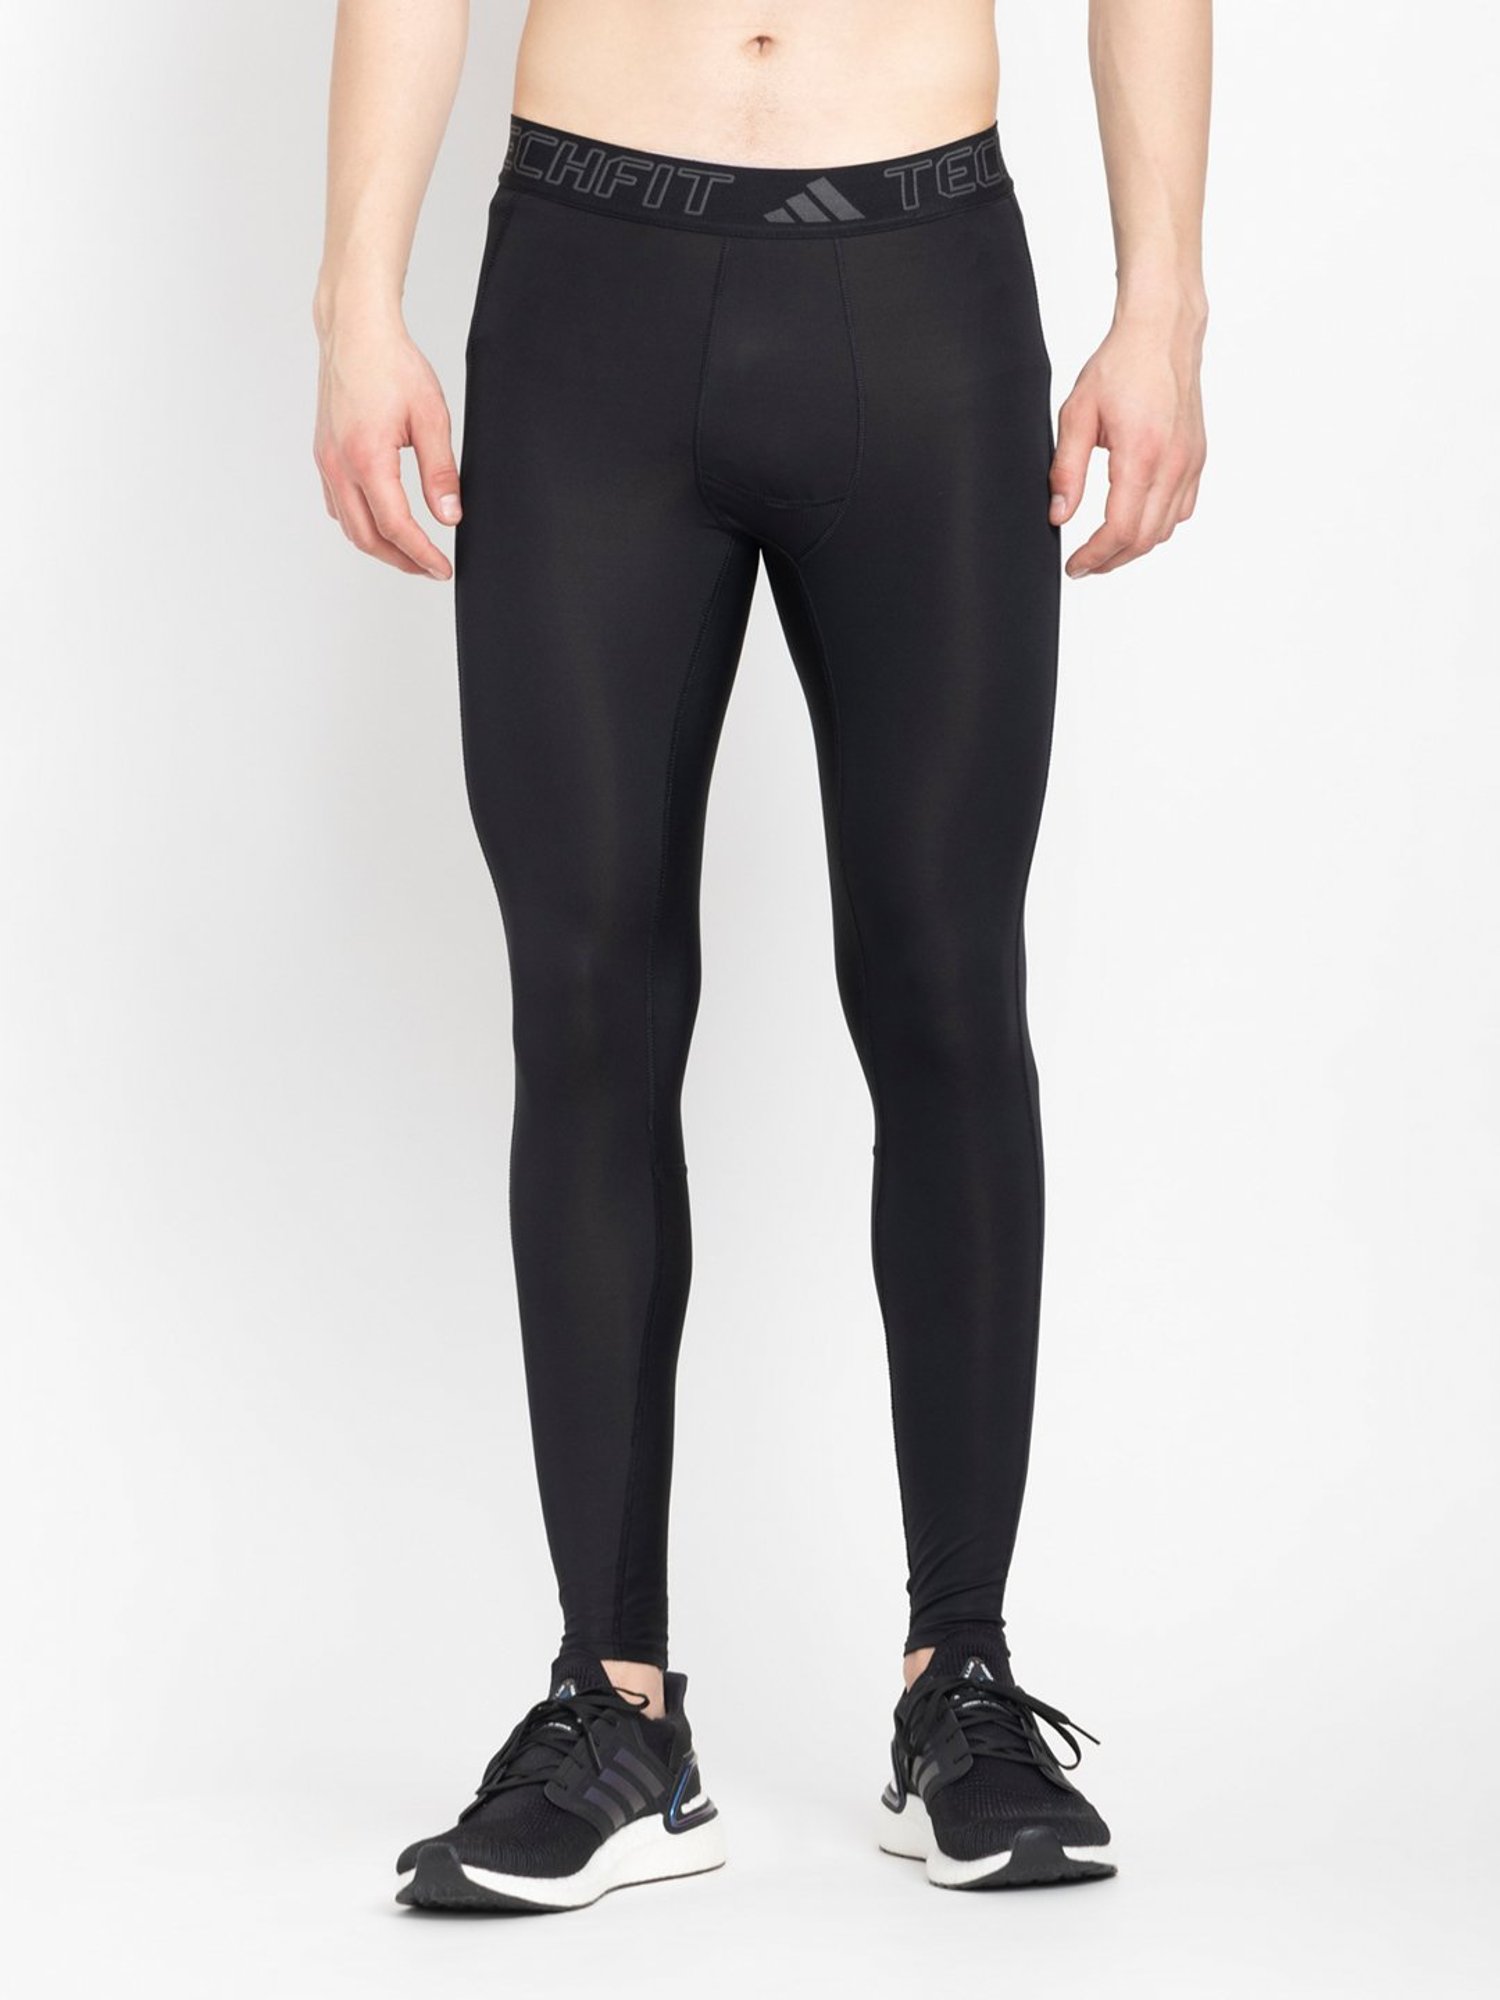 Buy adidas TECHFIT Black Fitted Sports Tights for Men's Online